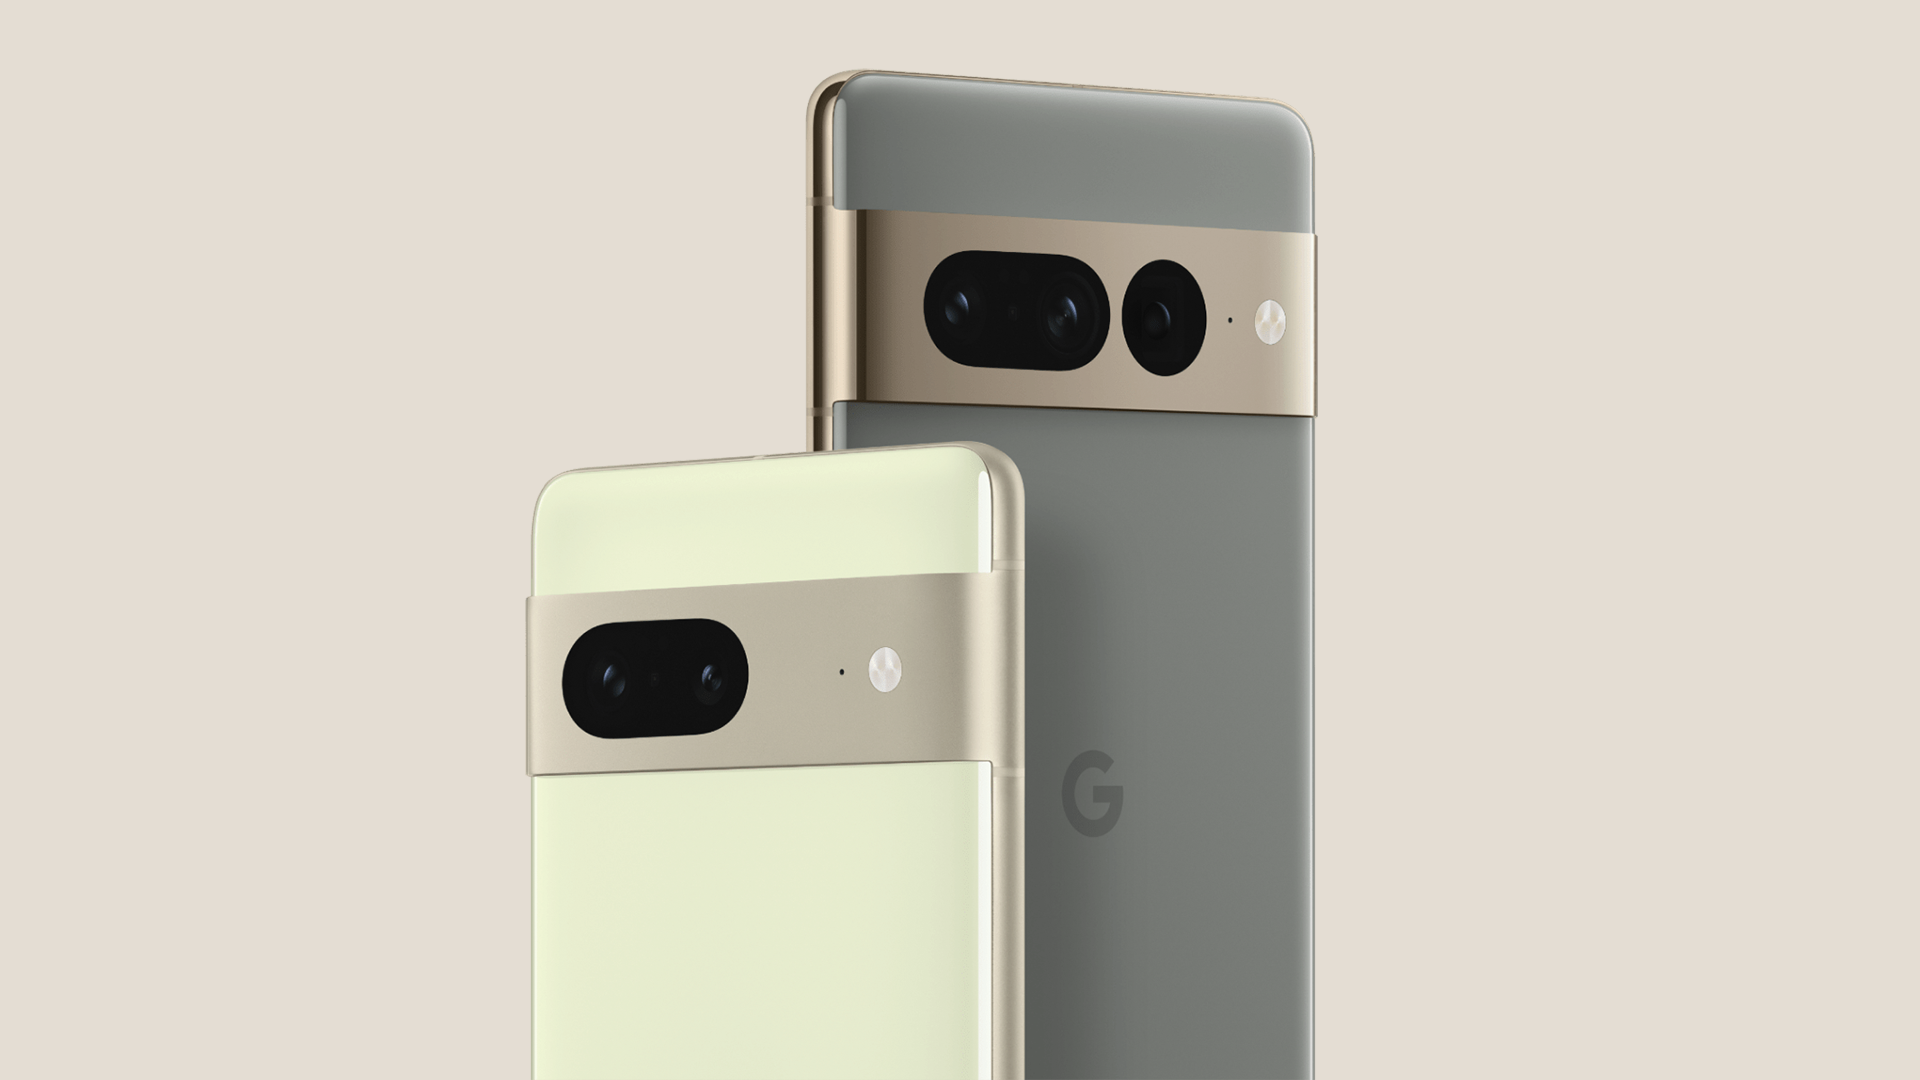 An official render of the Pixel 7 and Pixel 7 XL.